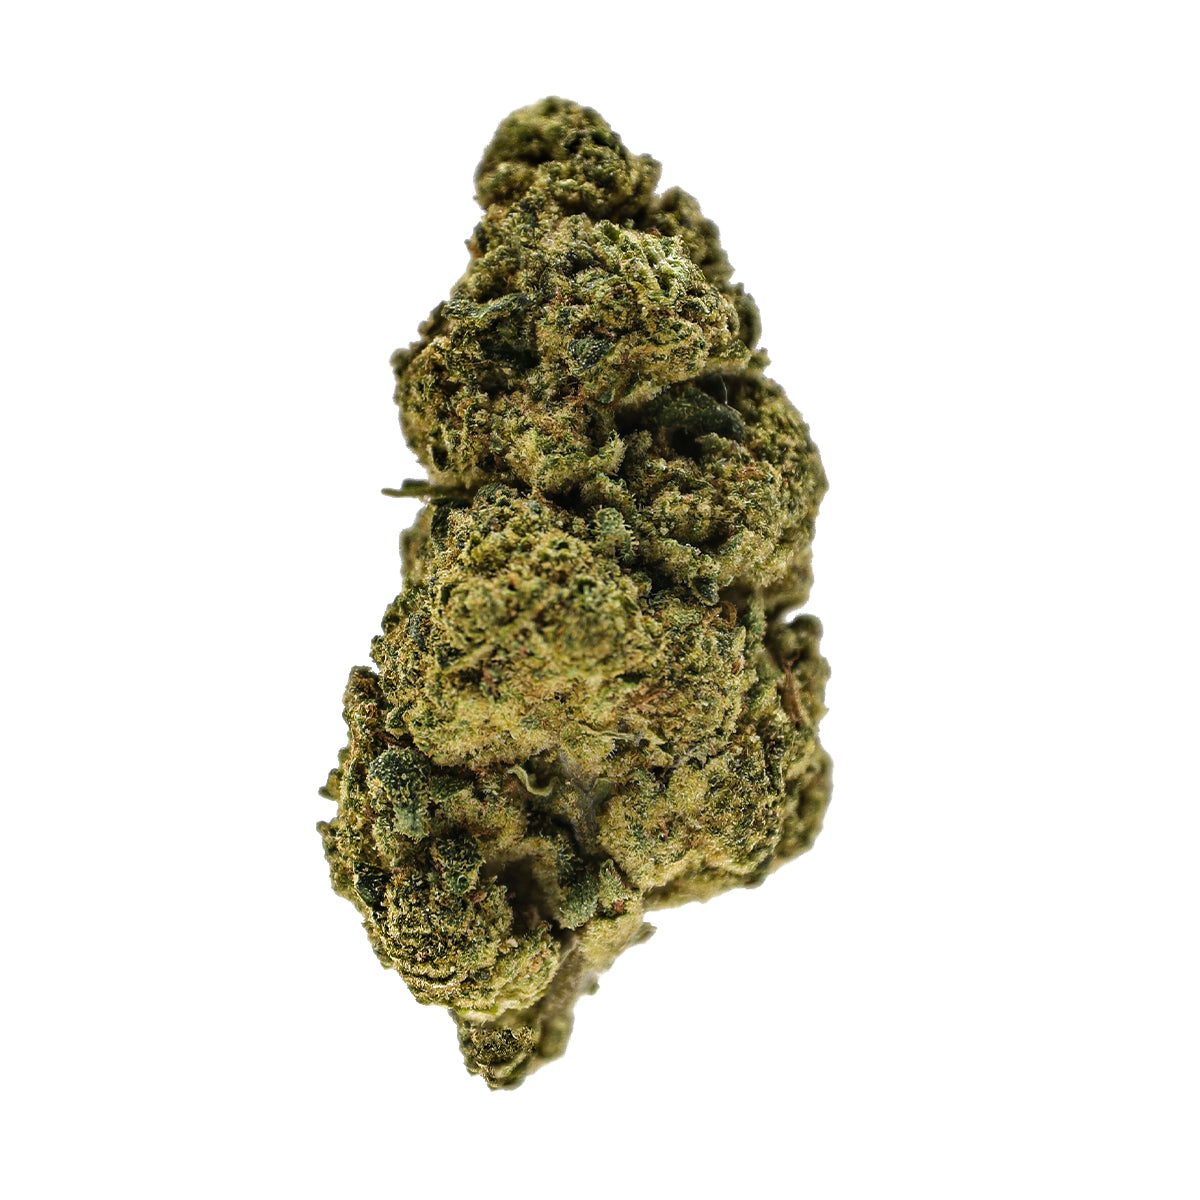 Peanut Butter Soufflé Premium THCa Indica Hemp Flower - This slighty indica dominant hybrid is a bright green cultivar with sticky trichomes and a cross between DosiDos and Lavacake. Perfect for a relaxing, elevated experience. Available in 3.5g and 14g size jars.